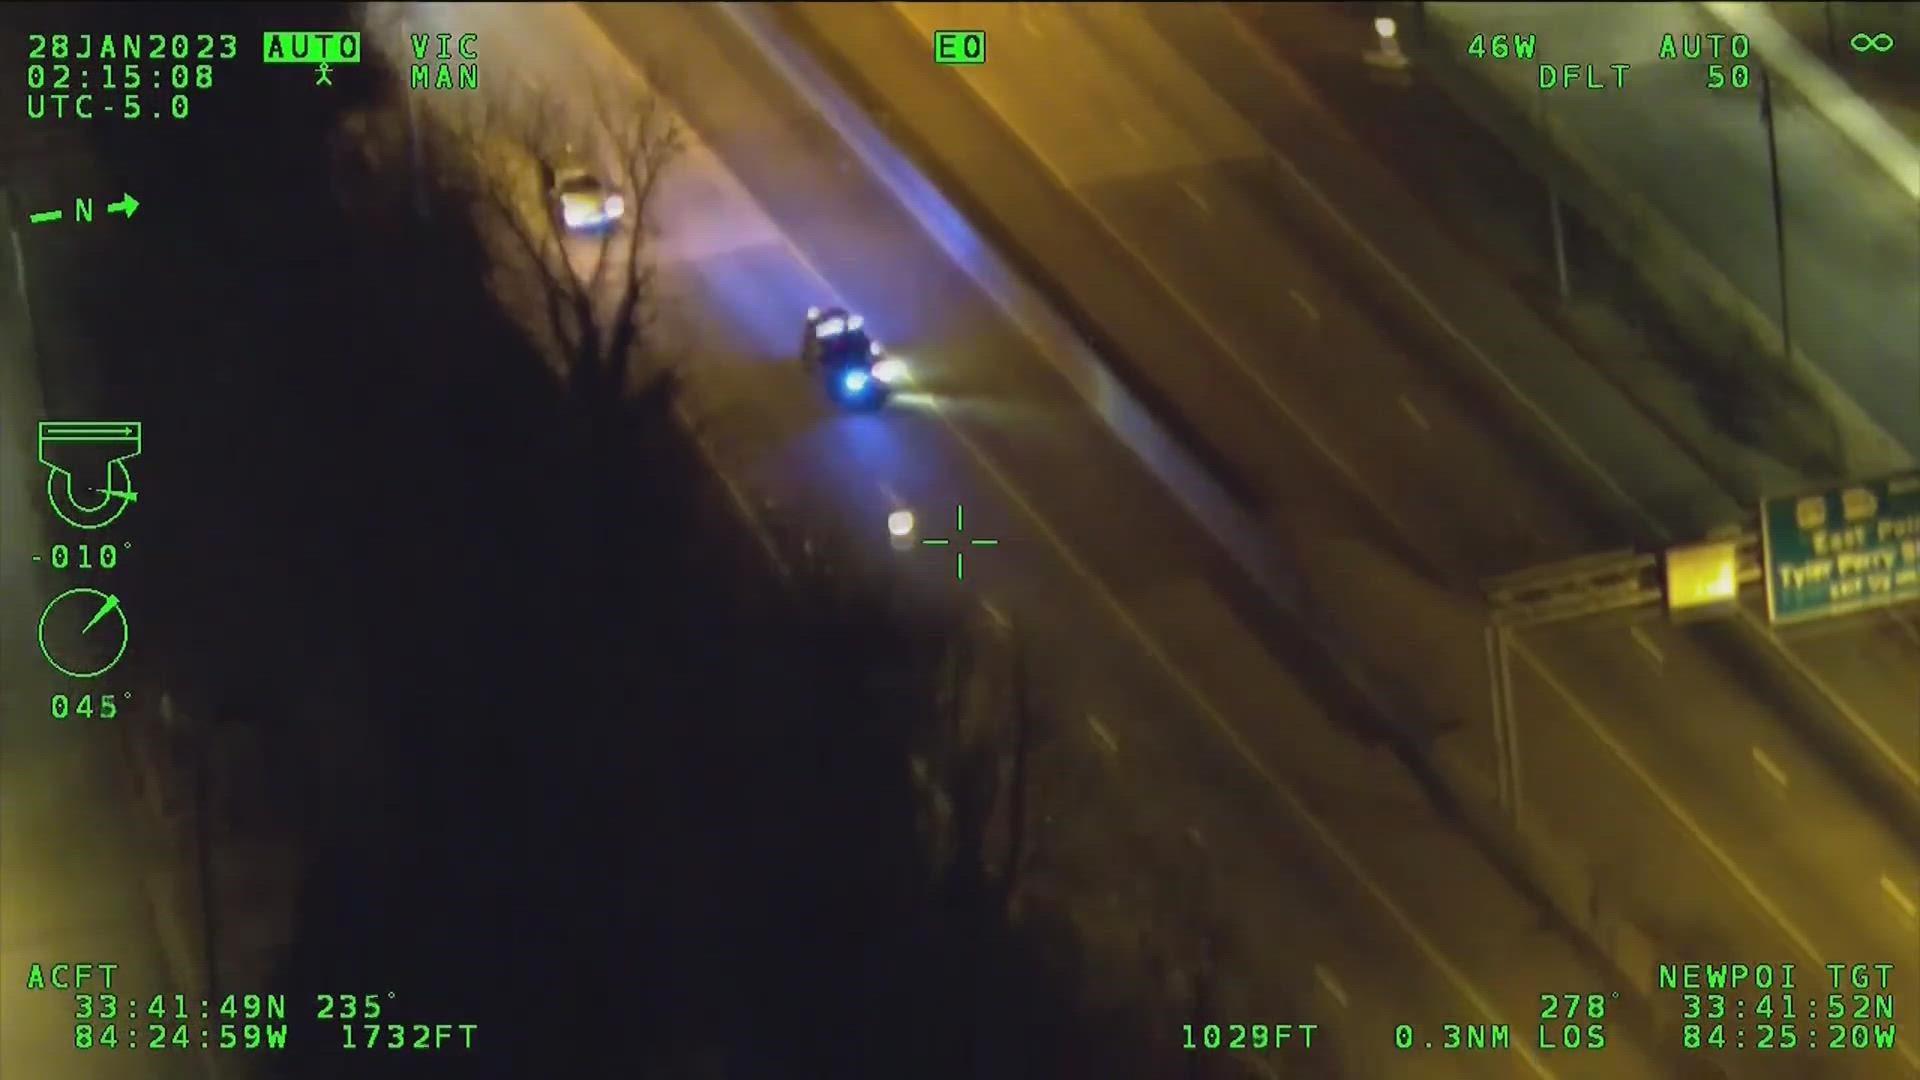 A routine traffic stop turned into a frantic police chase after a man stole an Atlanta police car, led officers on a high-speed pursuit.